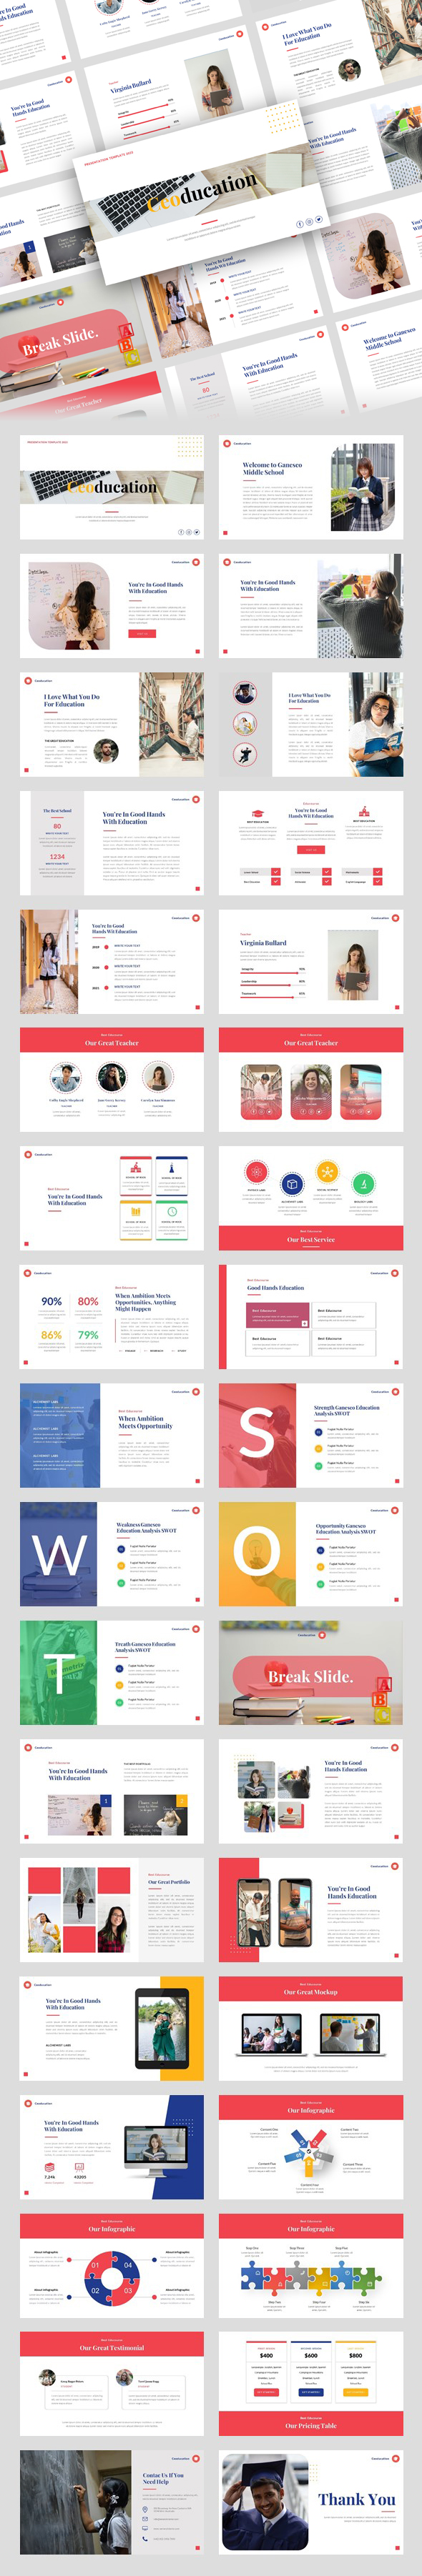 Ceoducation – Education & Learning Google Slides Template